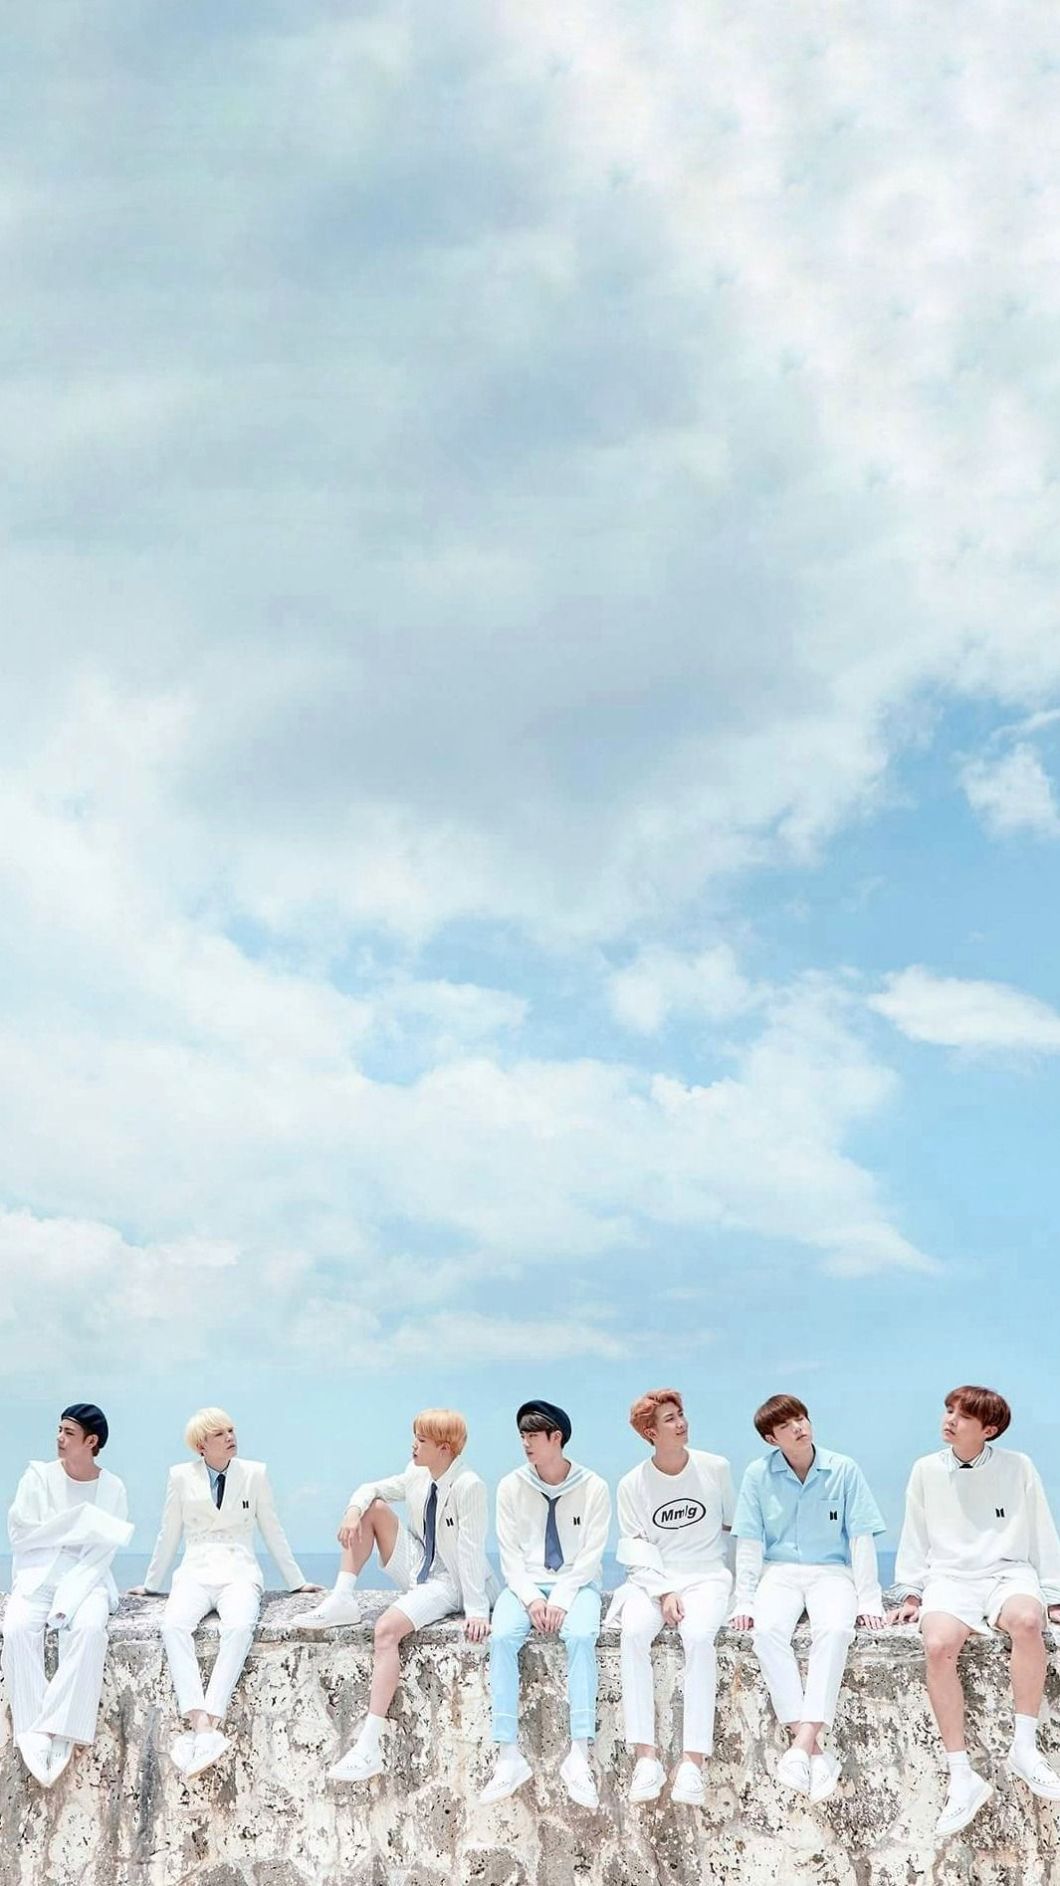 13 BTS 2019 Wallpapers For iPhone Android and Desktop   Page 2